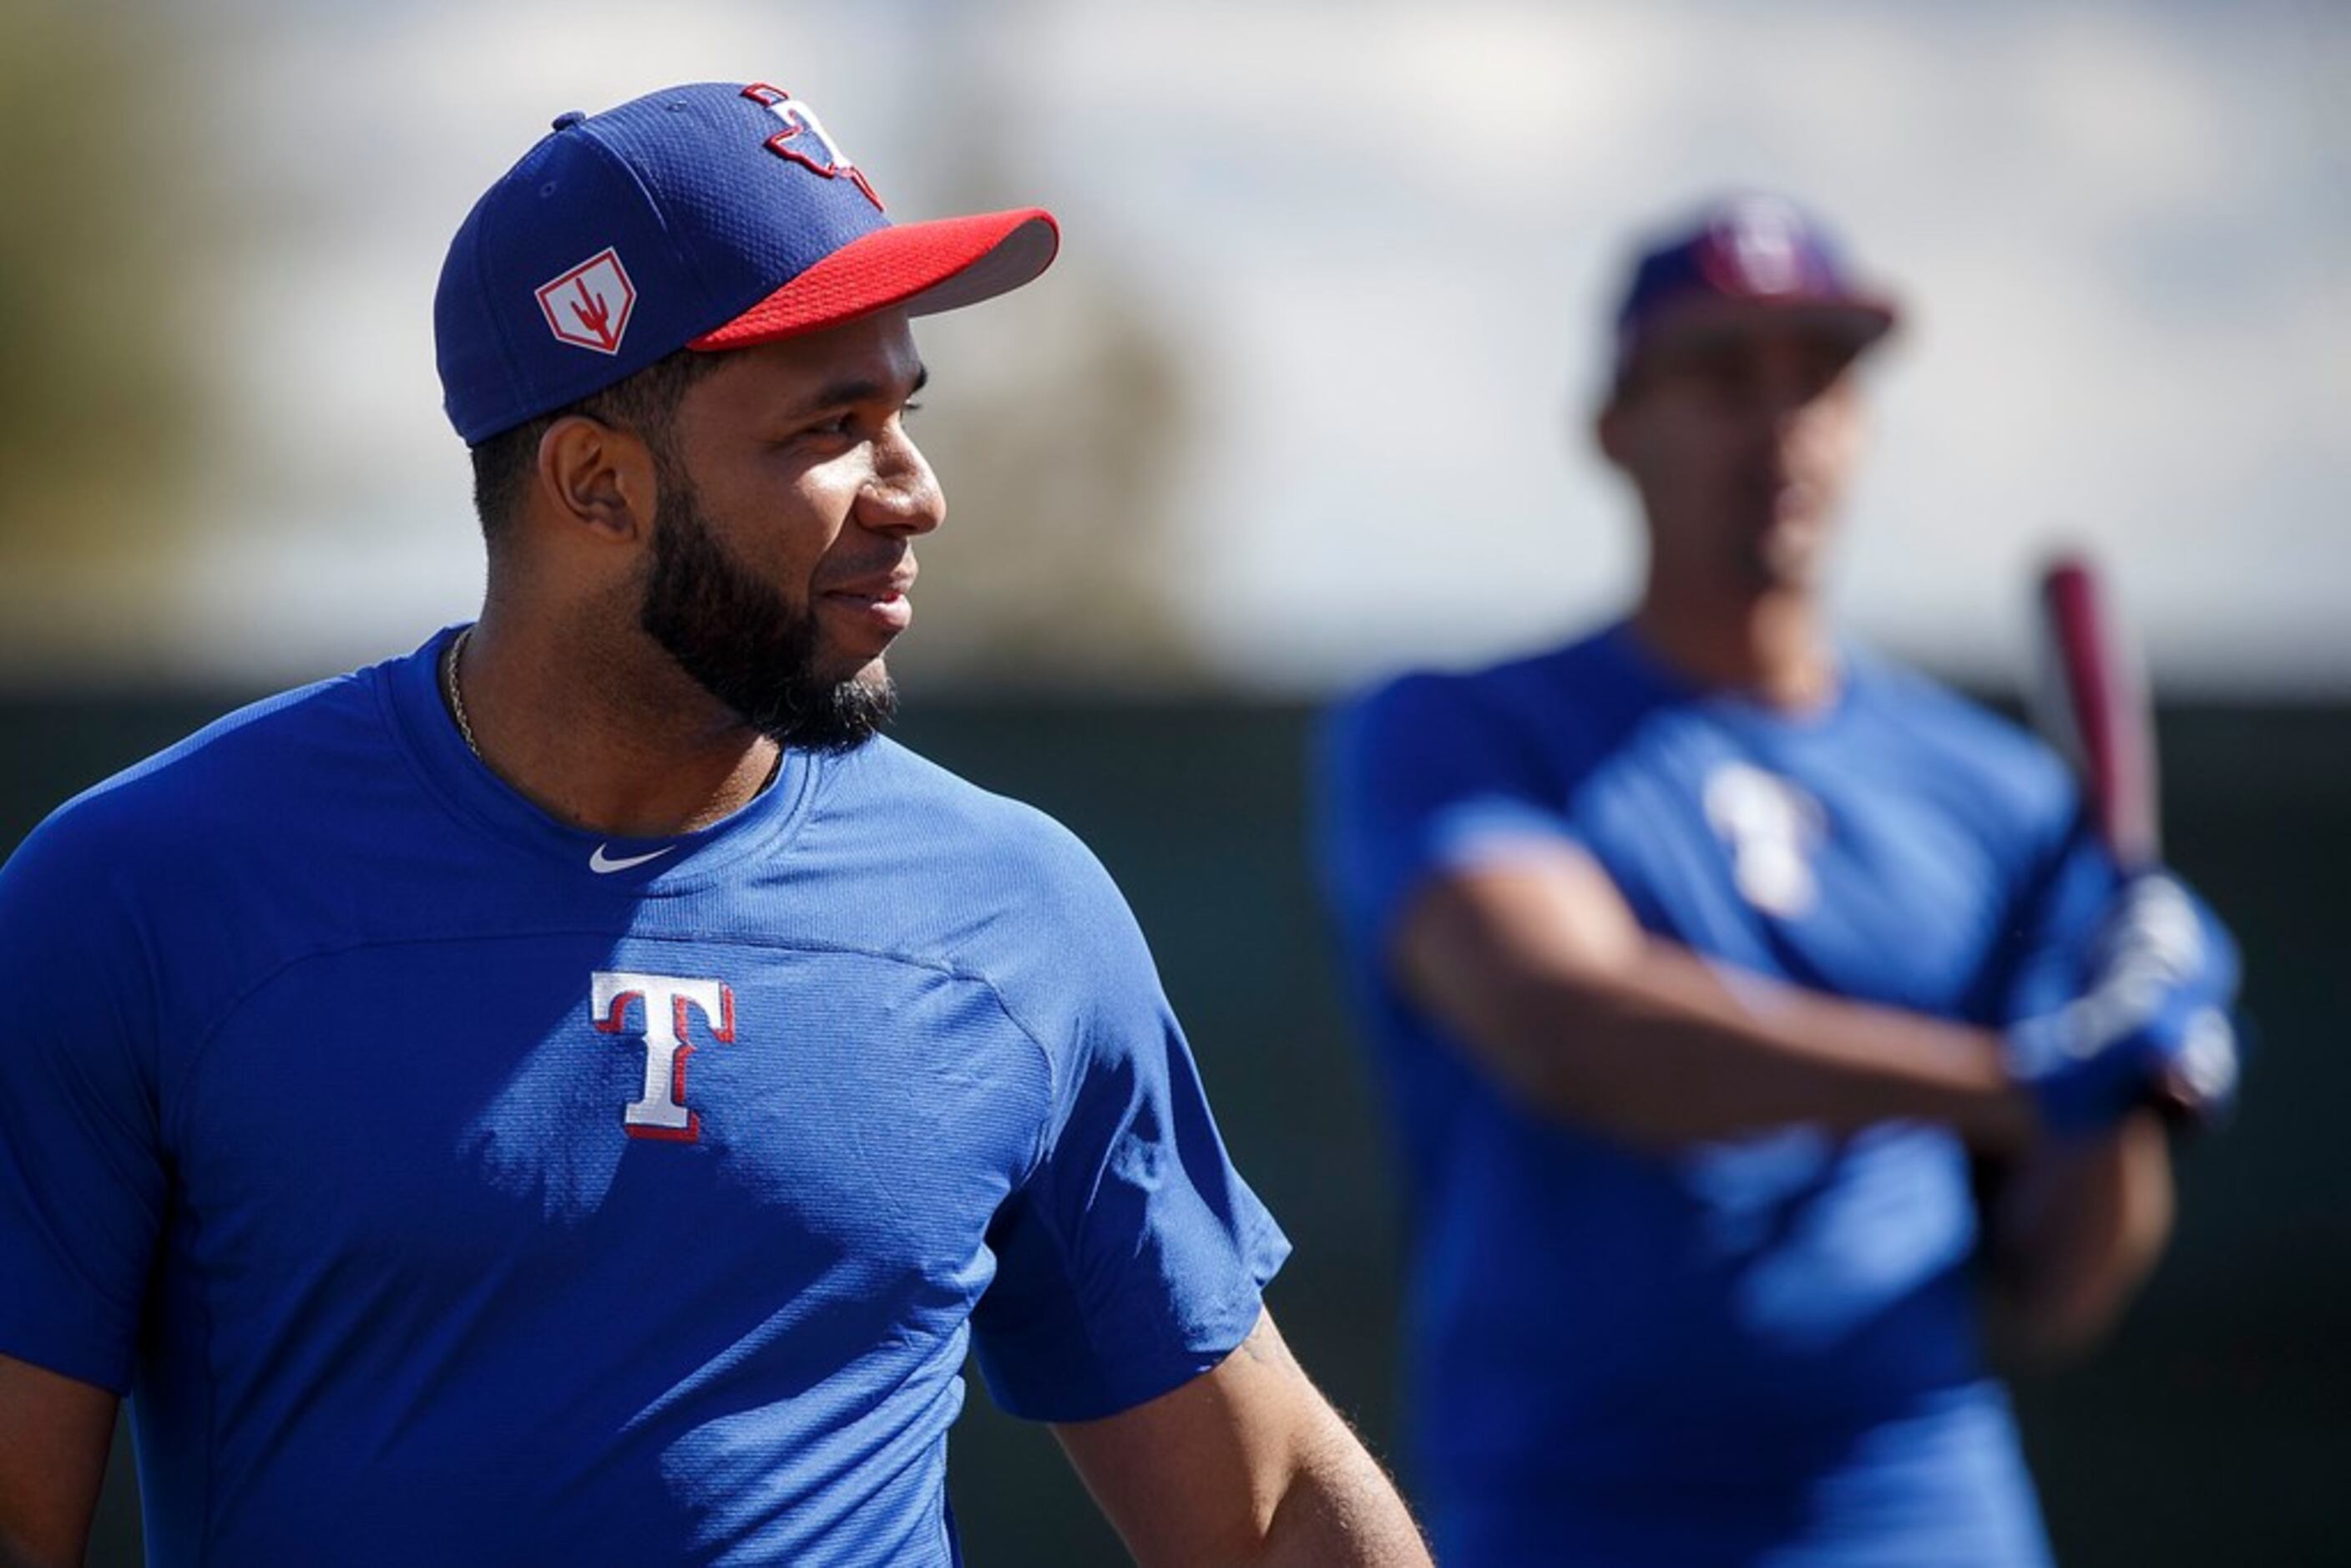 Texas Rangers Player Elvis Andrus Walks Out to 'Baby Shark